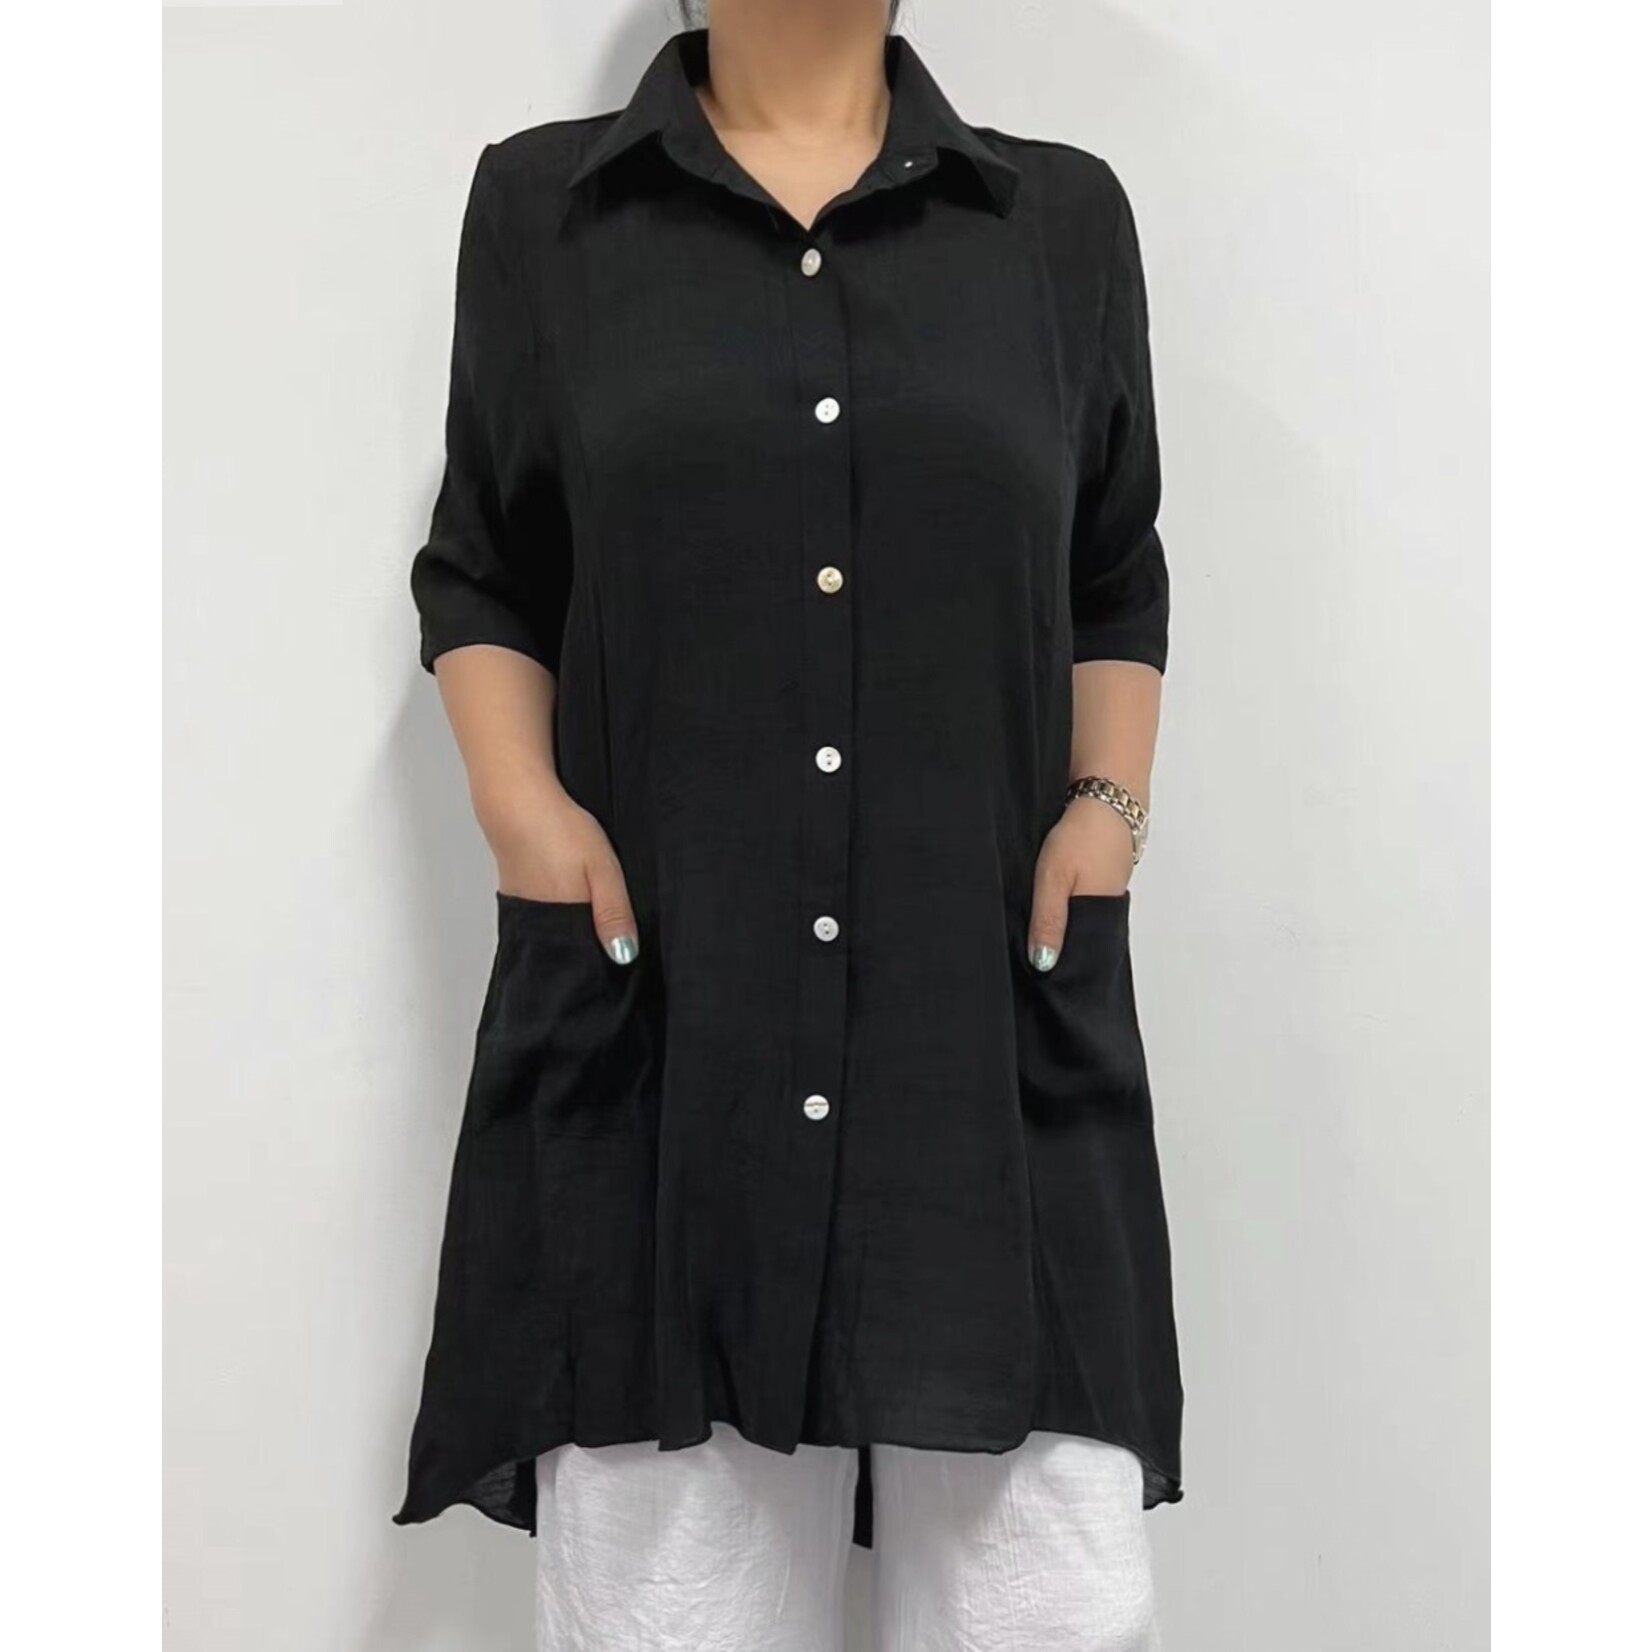 Creations short sleeve long button blouse cover up with pockets